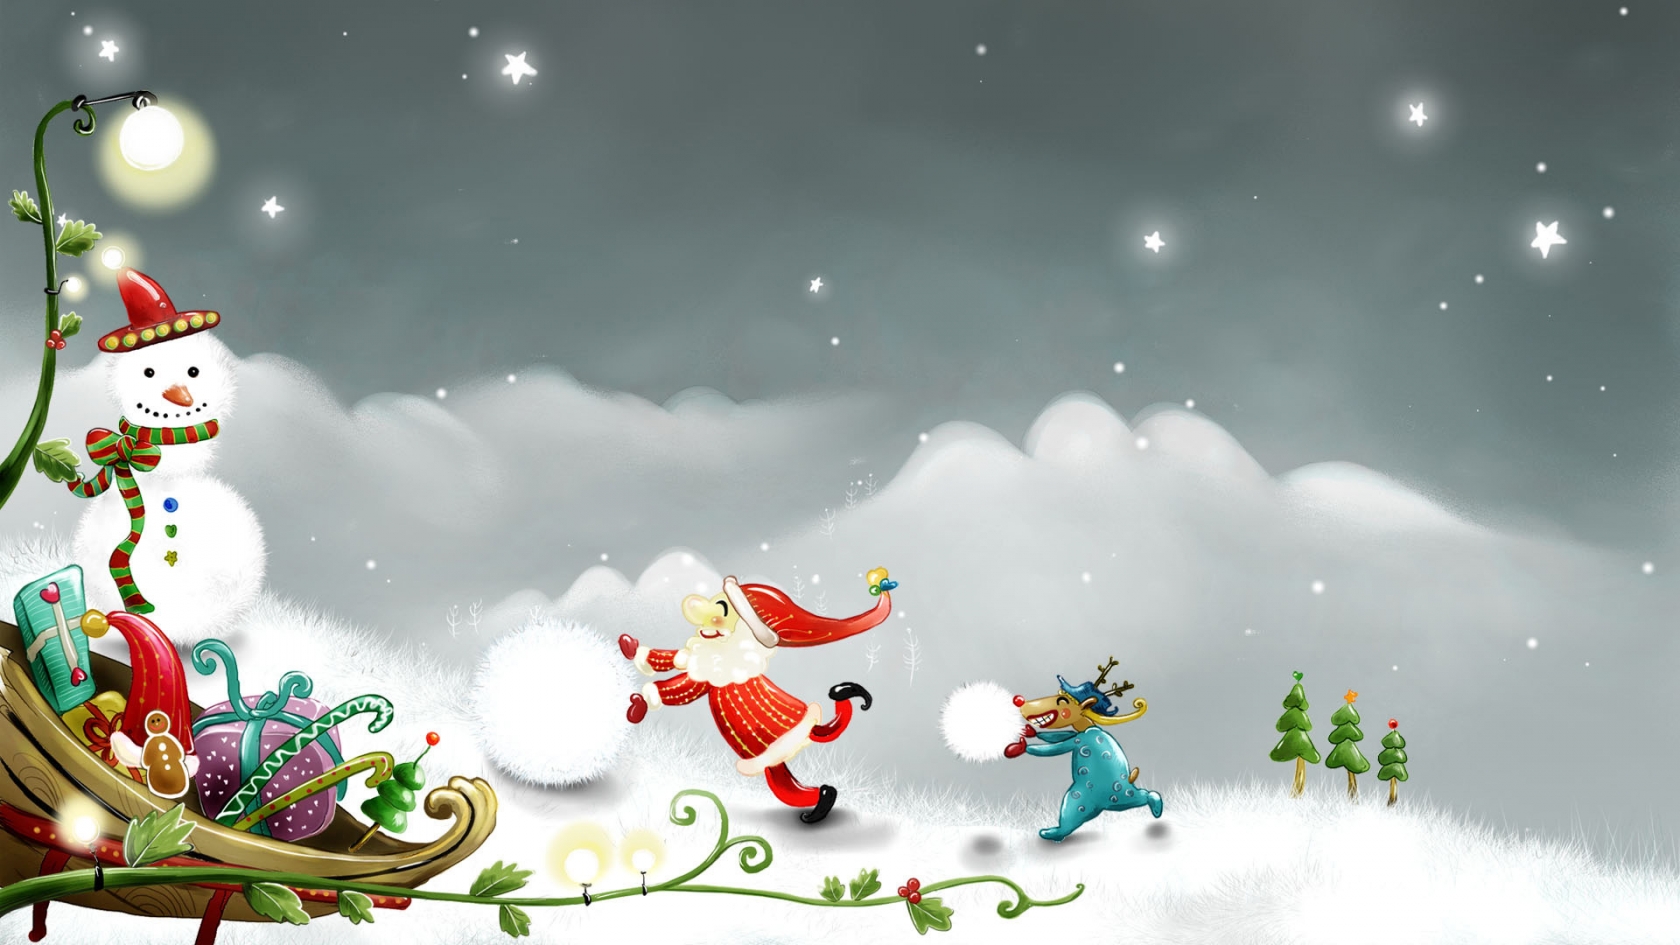 Snowman and Santa Claus for 1680 x 945 HDTV resolution